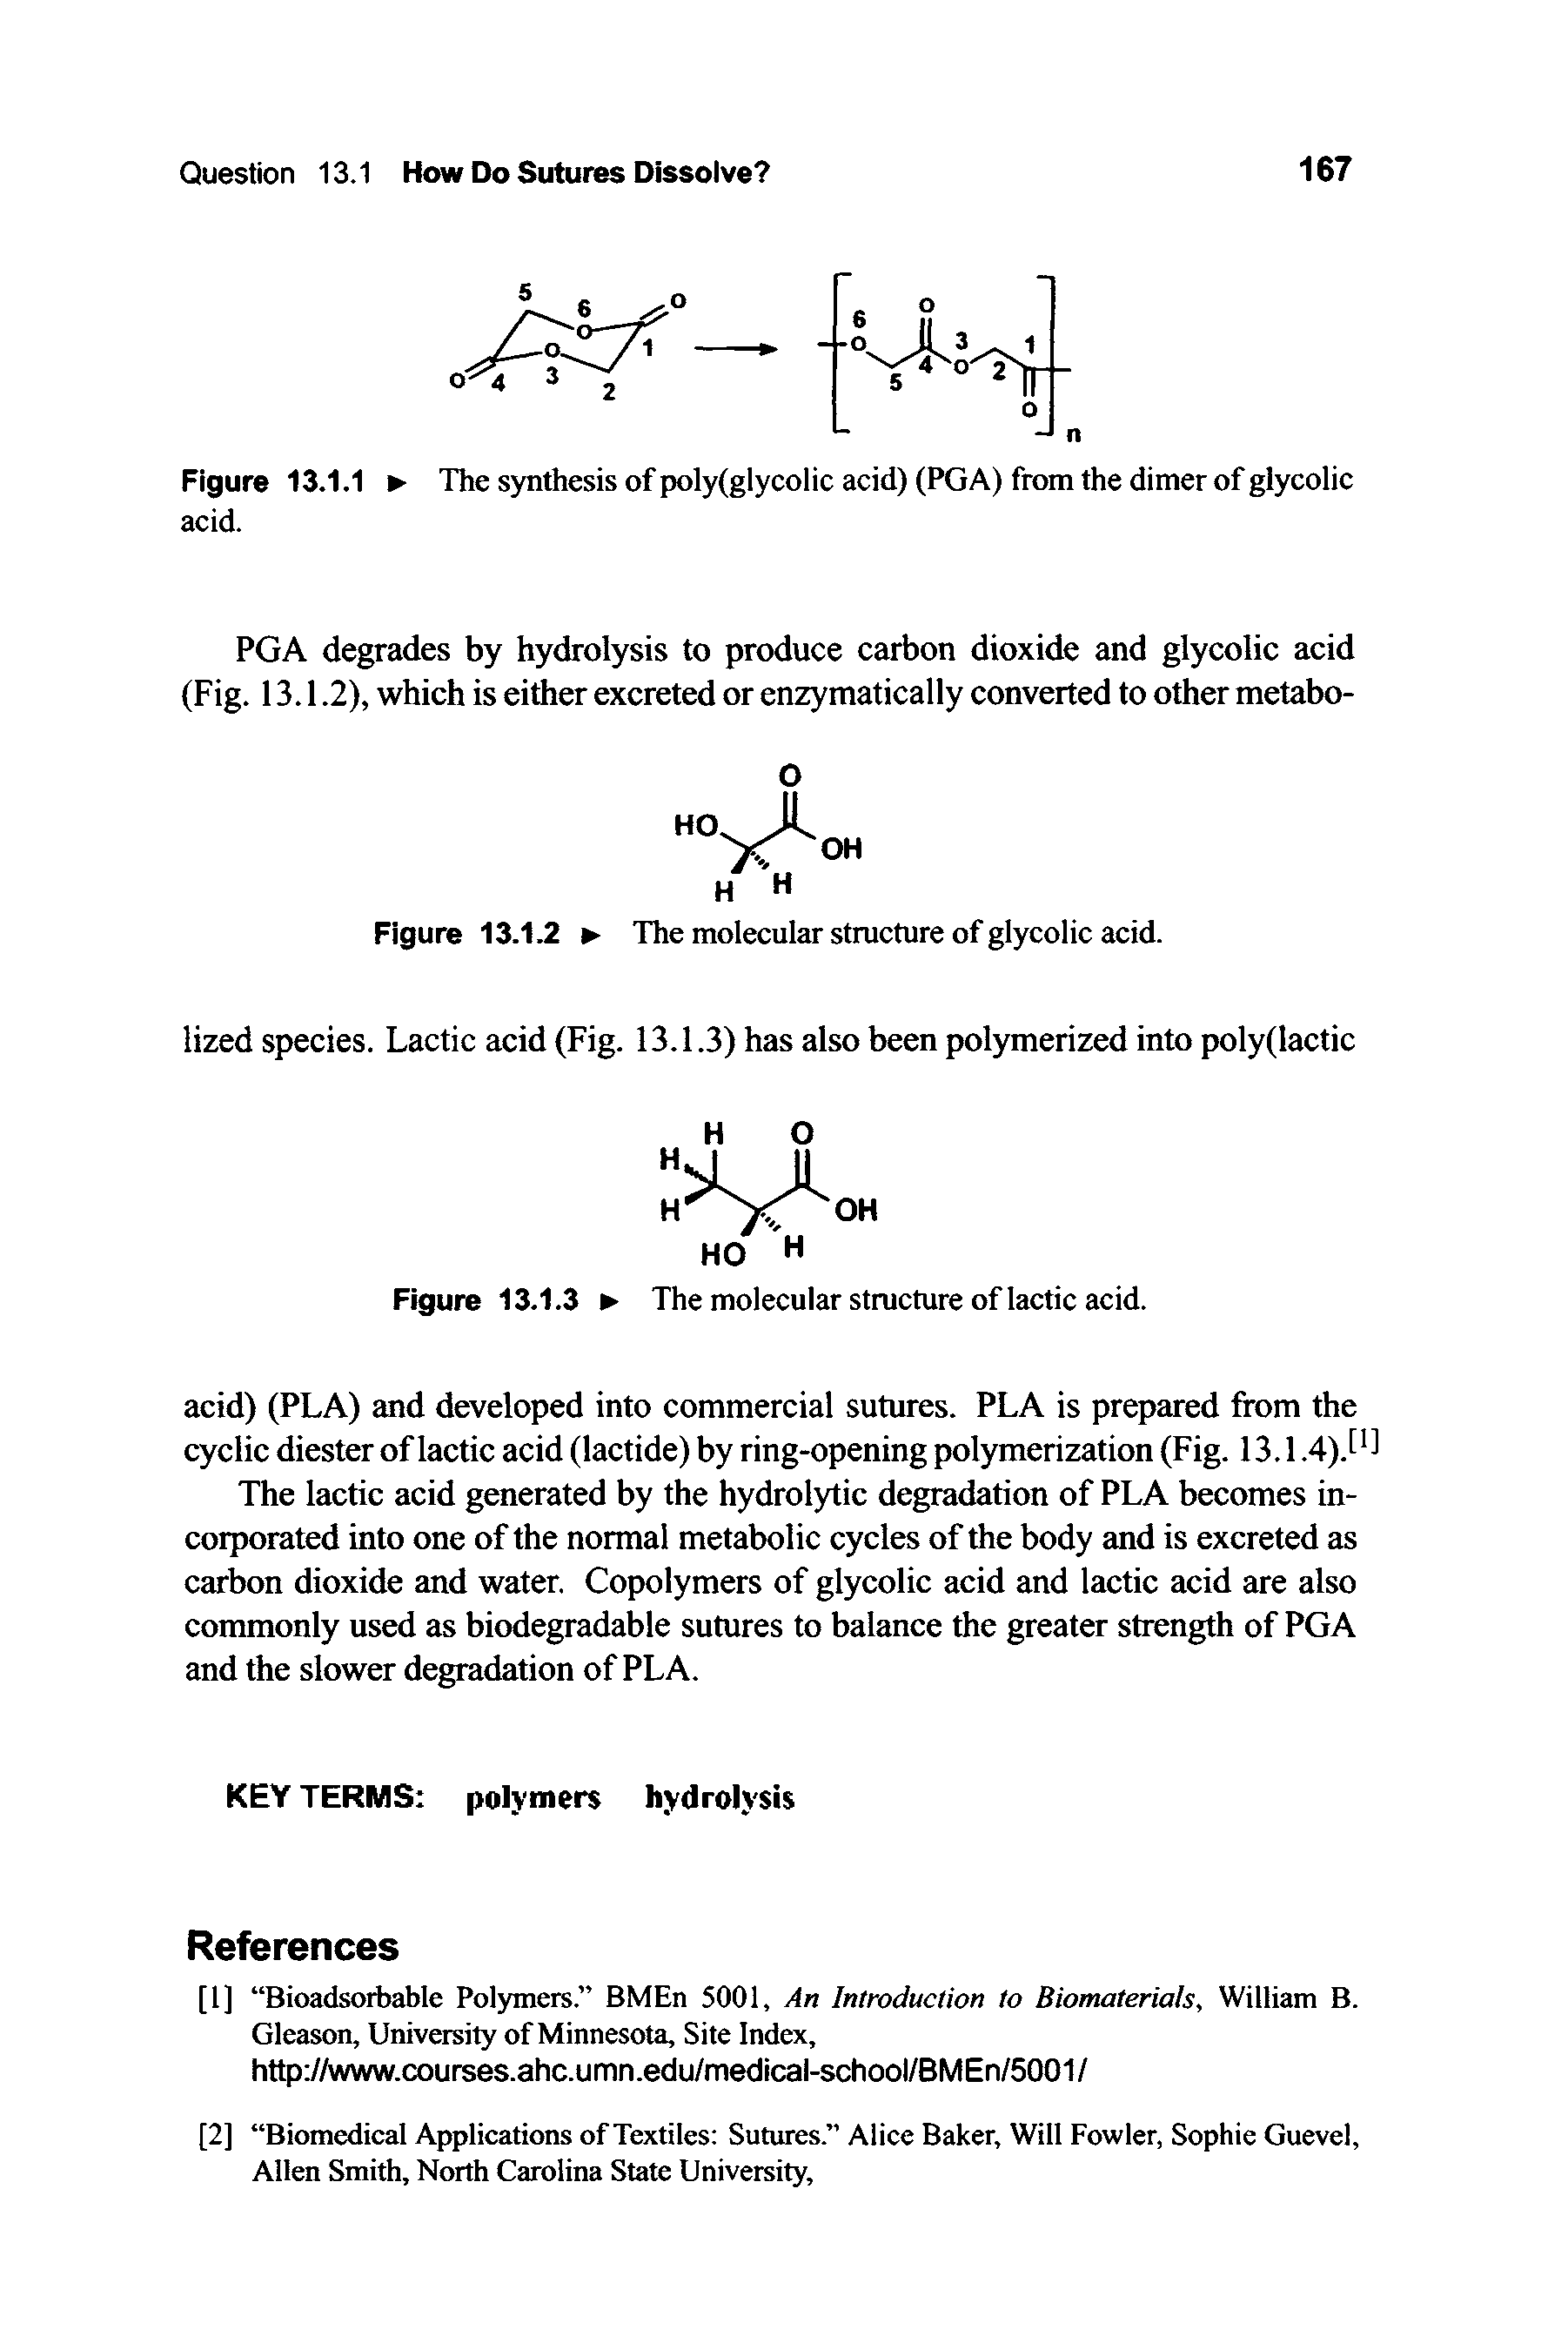 Figure 13.1.1 The synthesis of poly(glycolic acid) (PGA) from the dimer of glycolic acid.